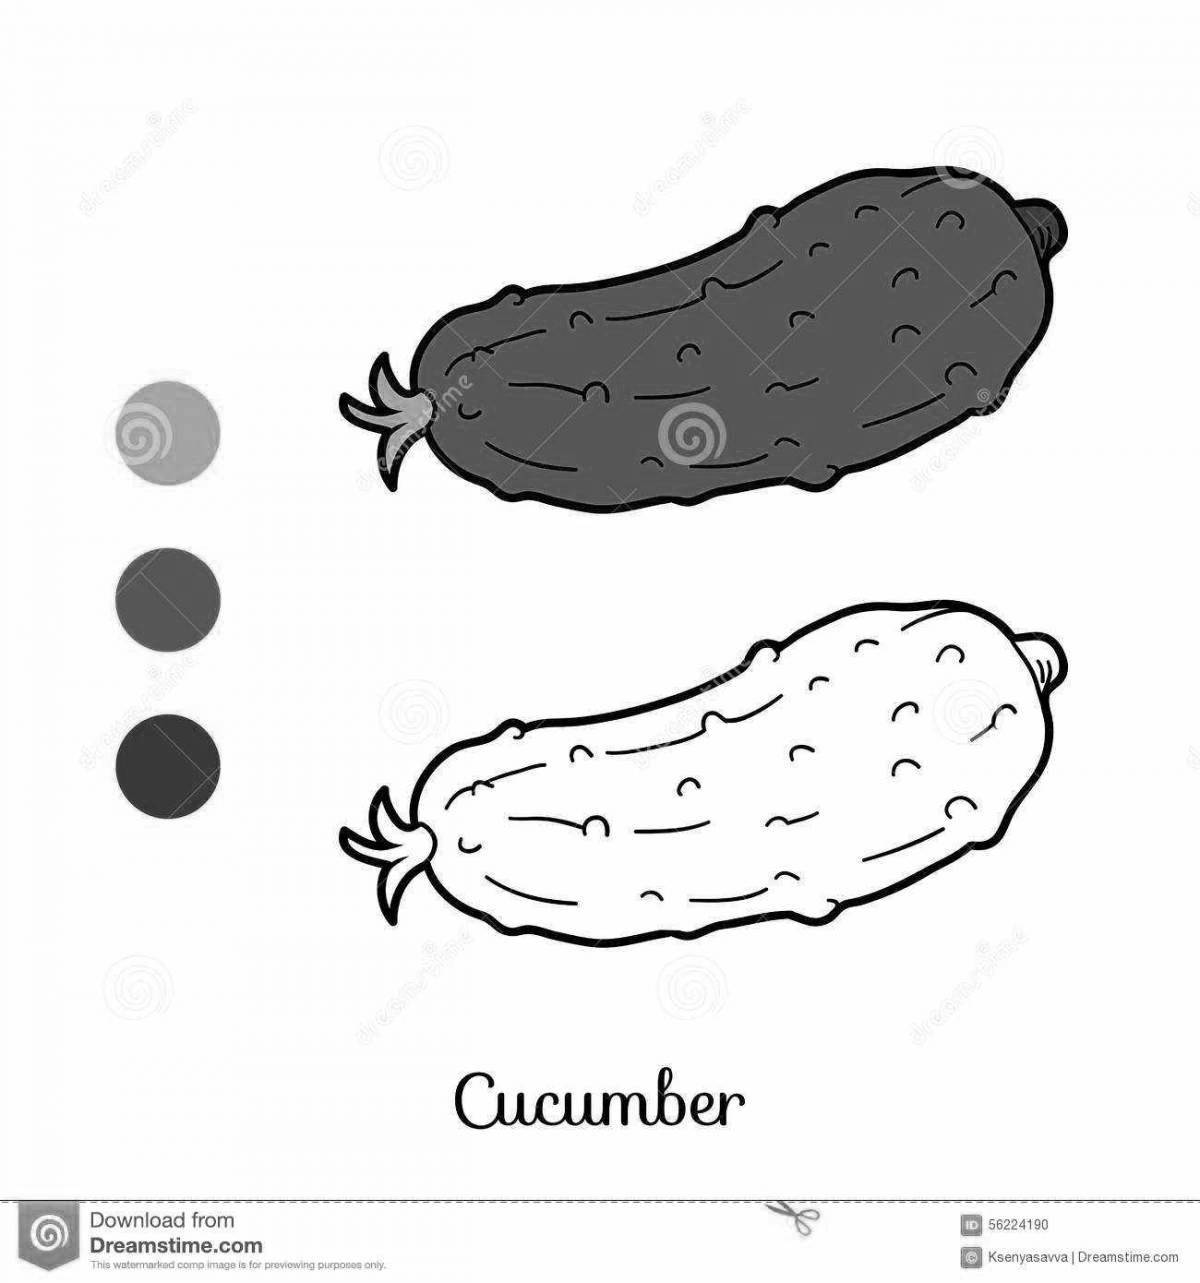 Awesome tomato and cucumber coloring page